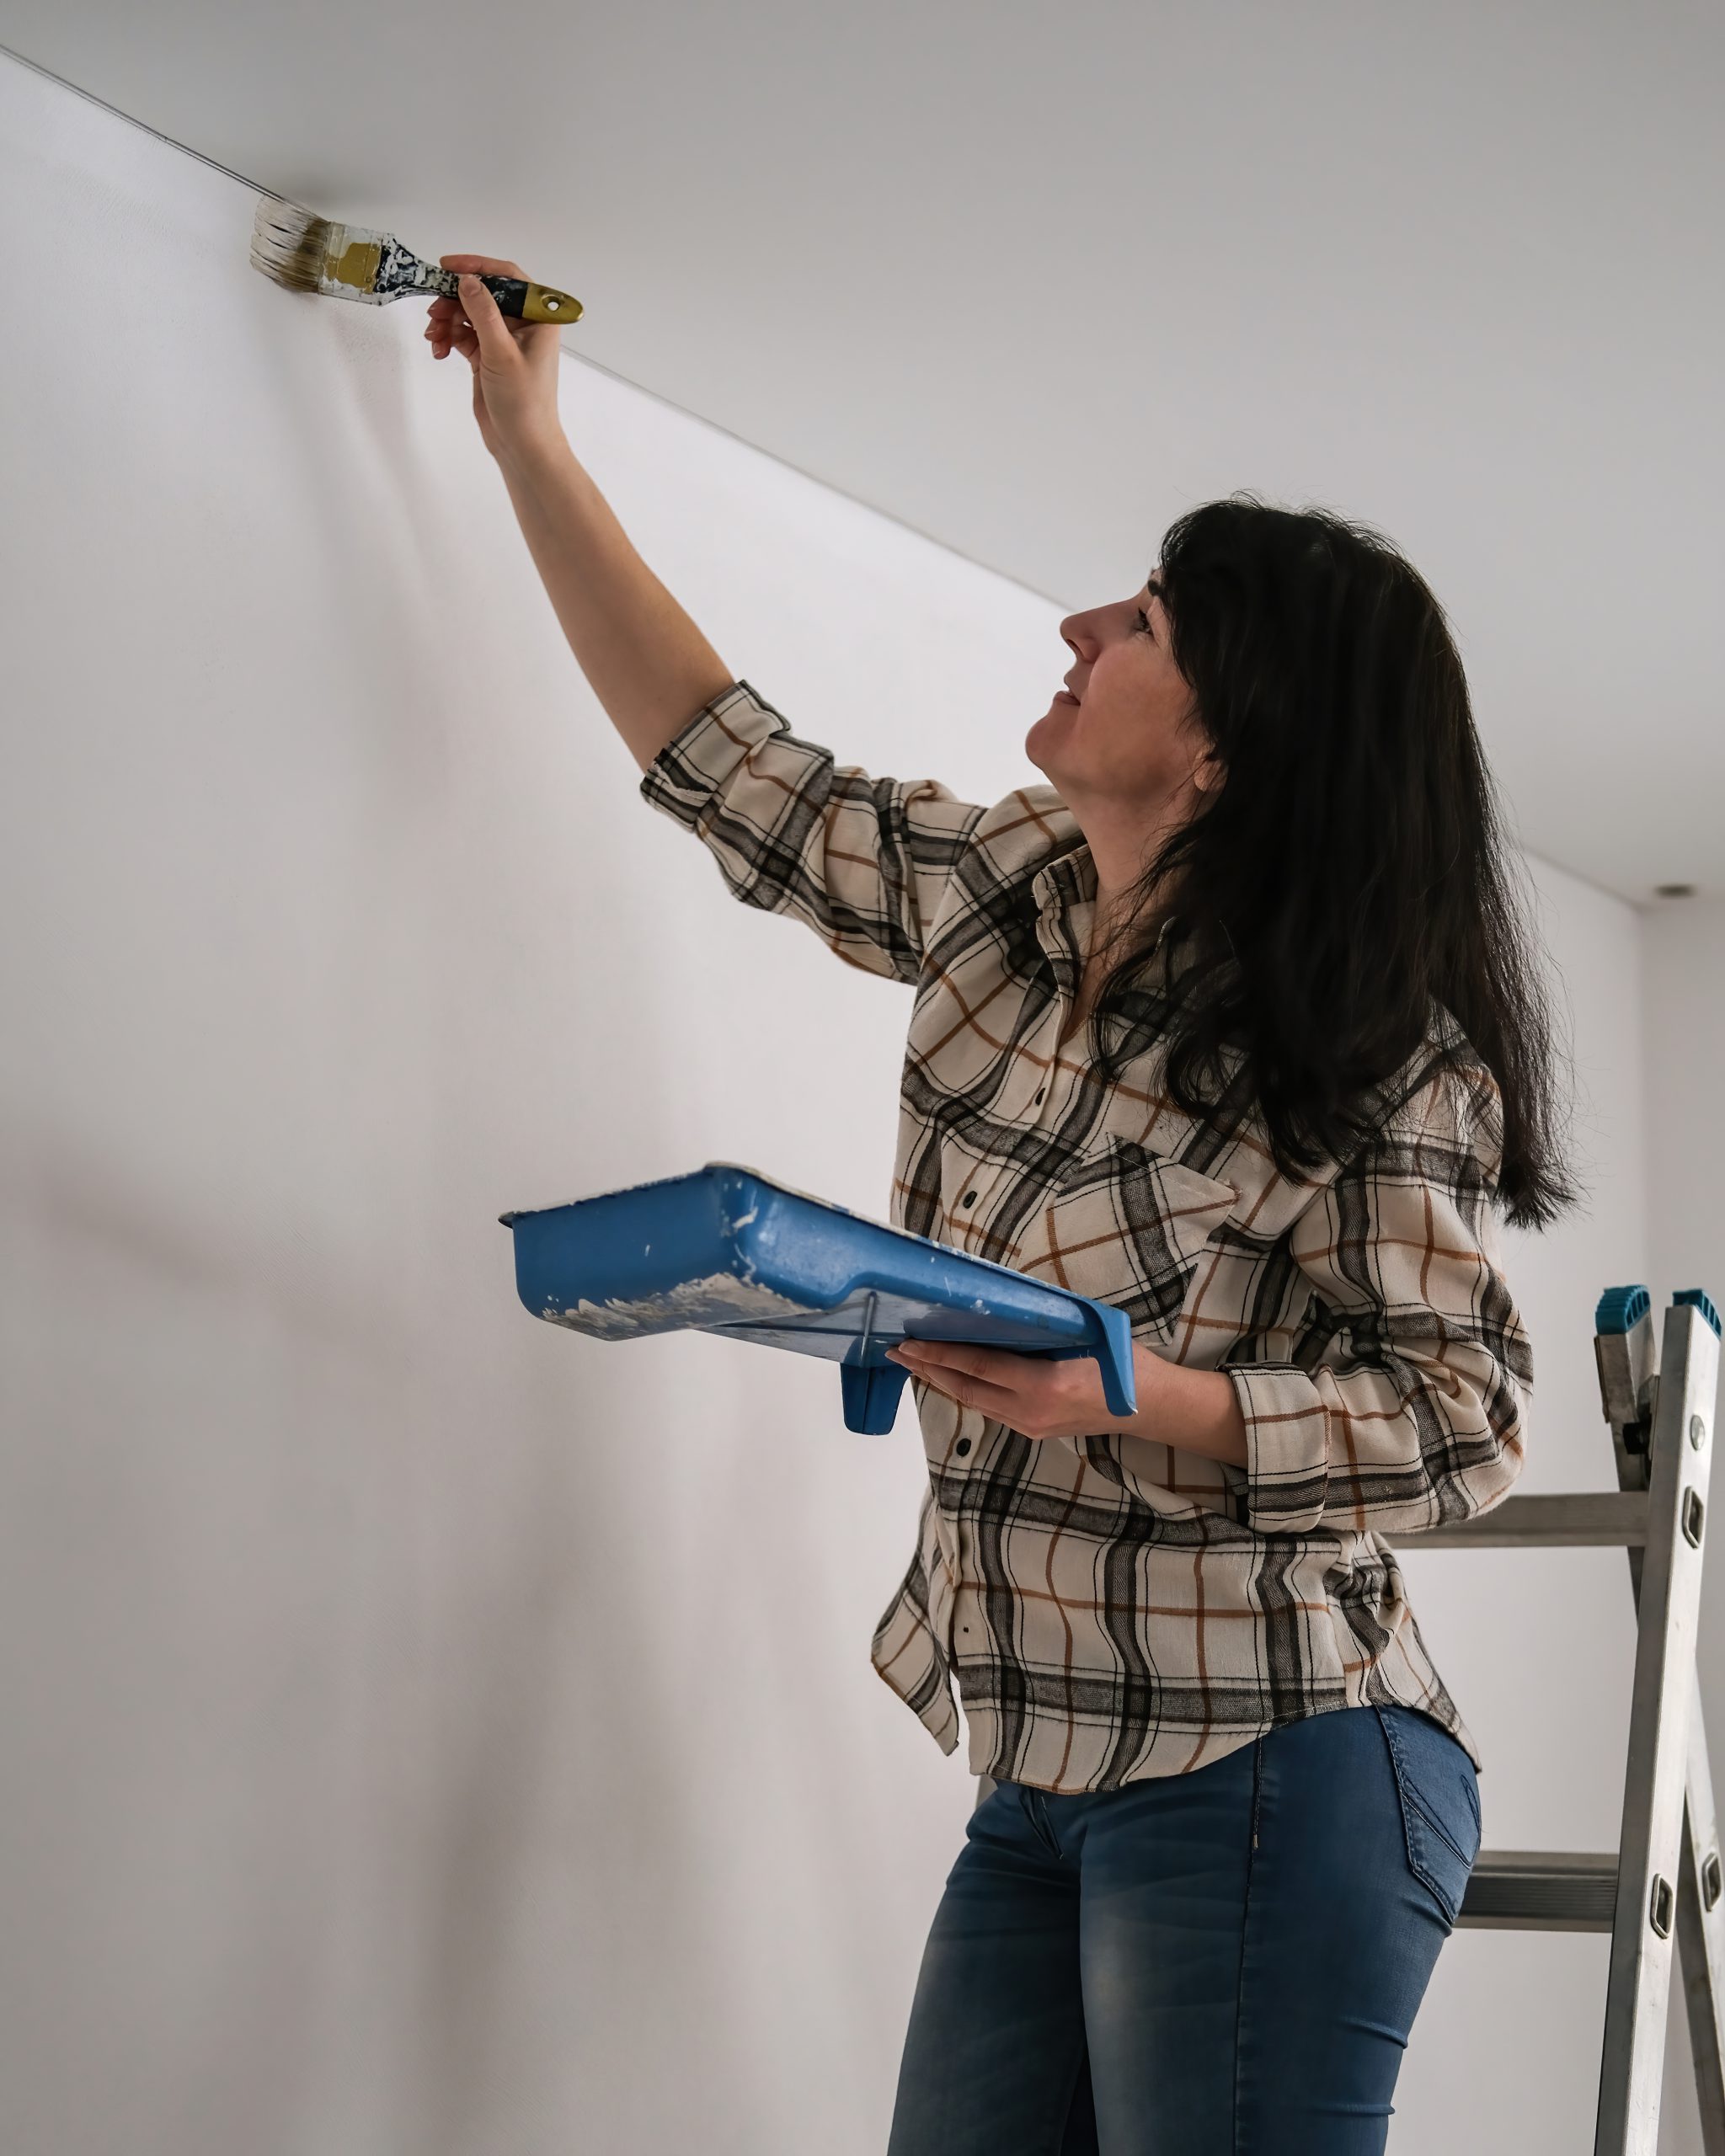 Woman Painting A Wall With White Paint 2023 11 27 04 52 17 Utc